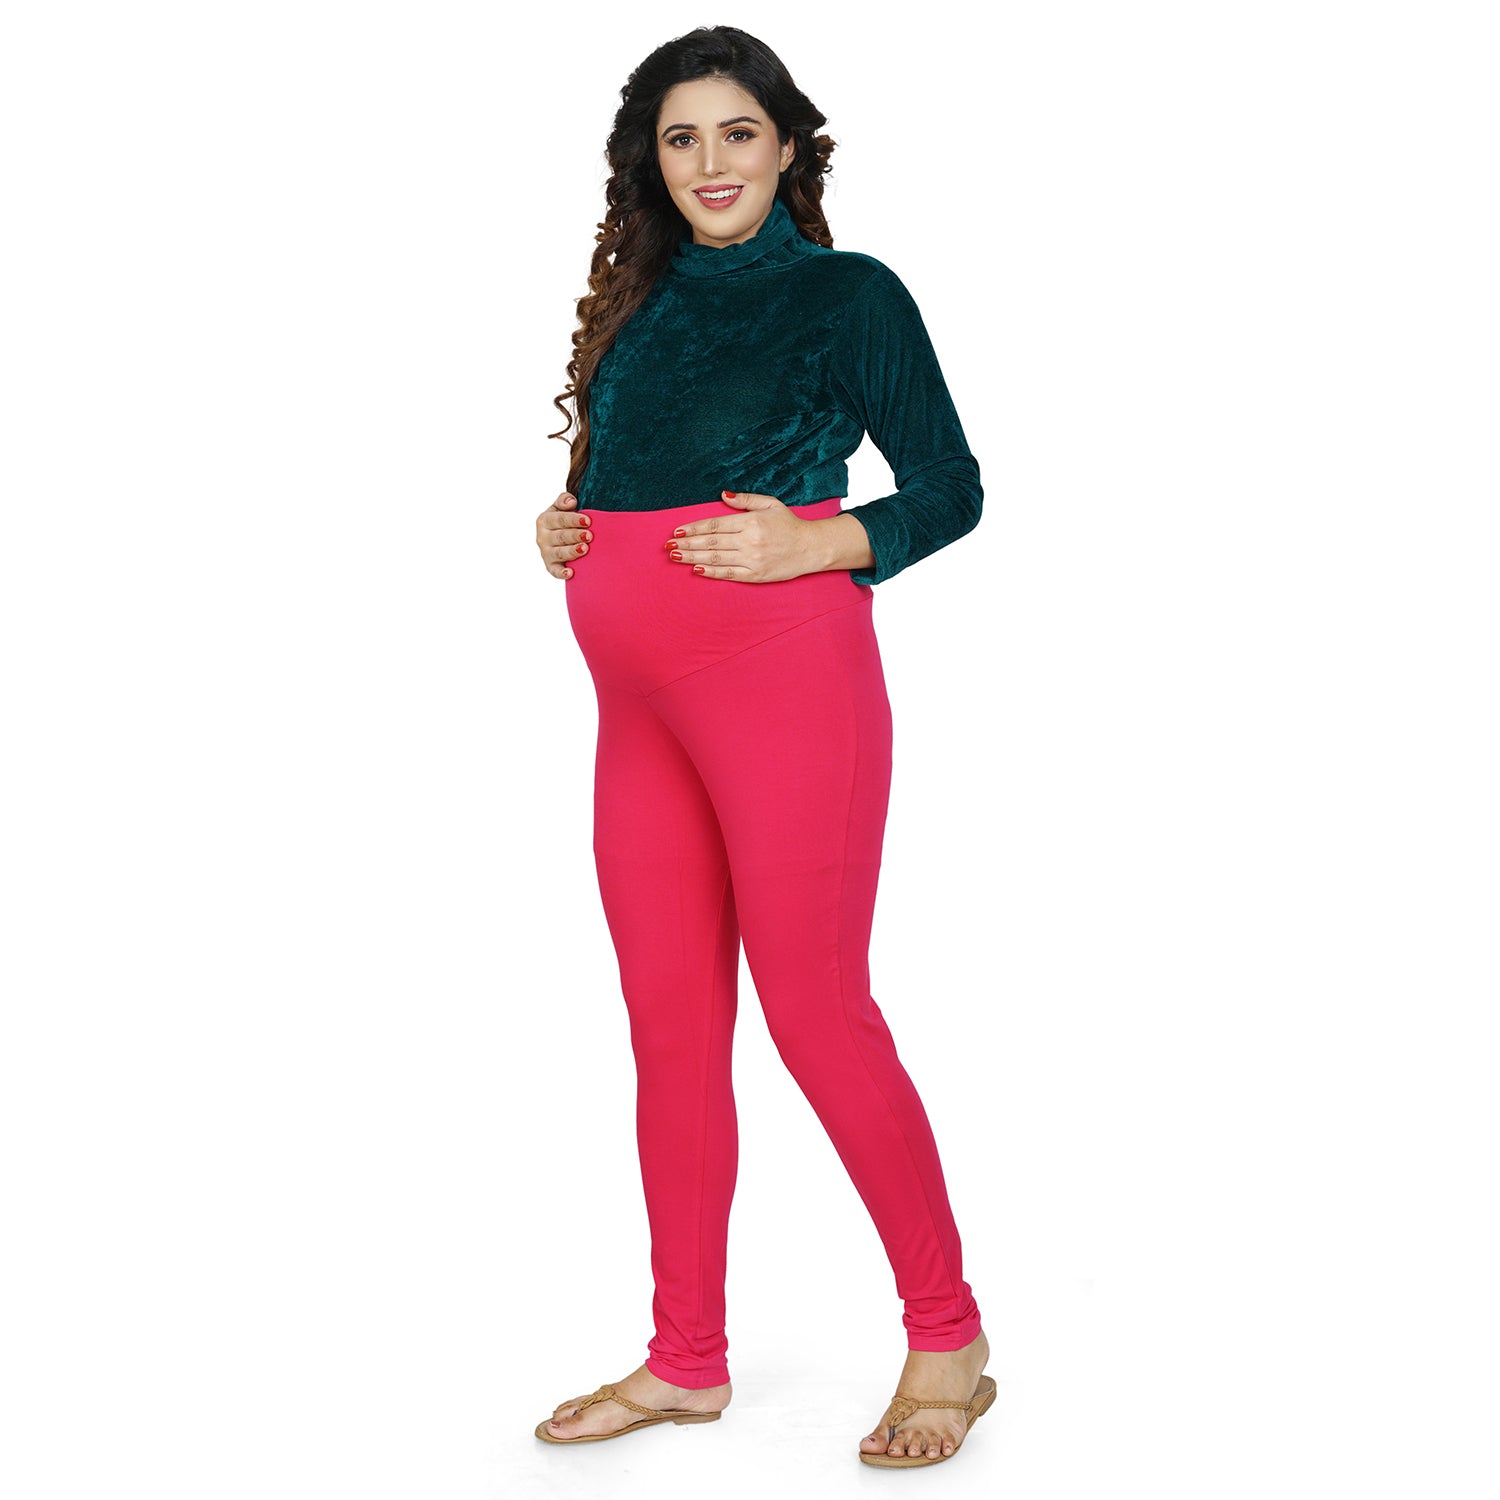 Baby Moo Soft And Comfy Full Length Maternity Leggings Solid - Pink - Baby Moo